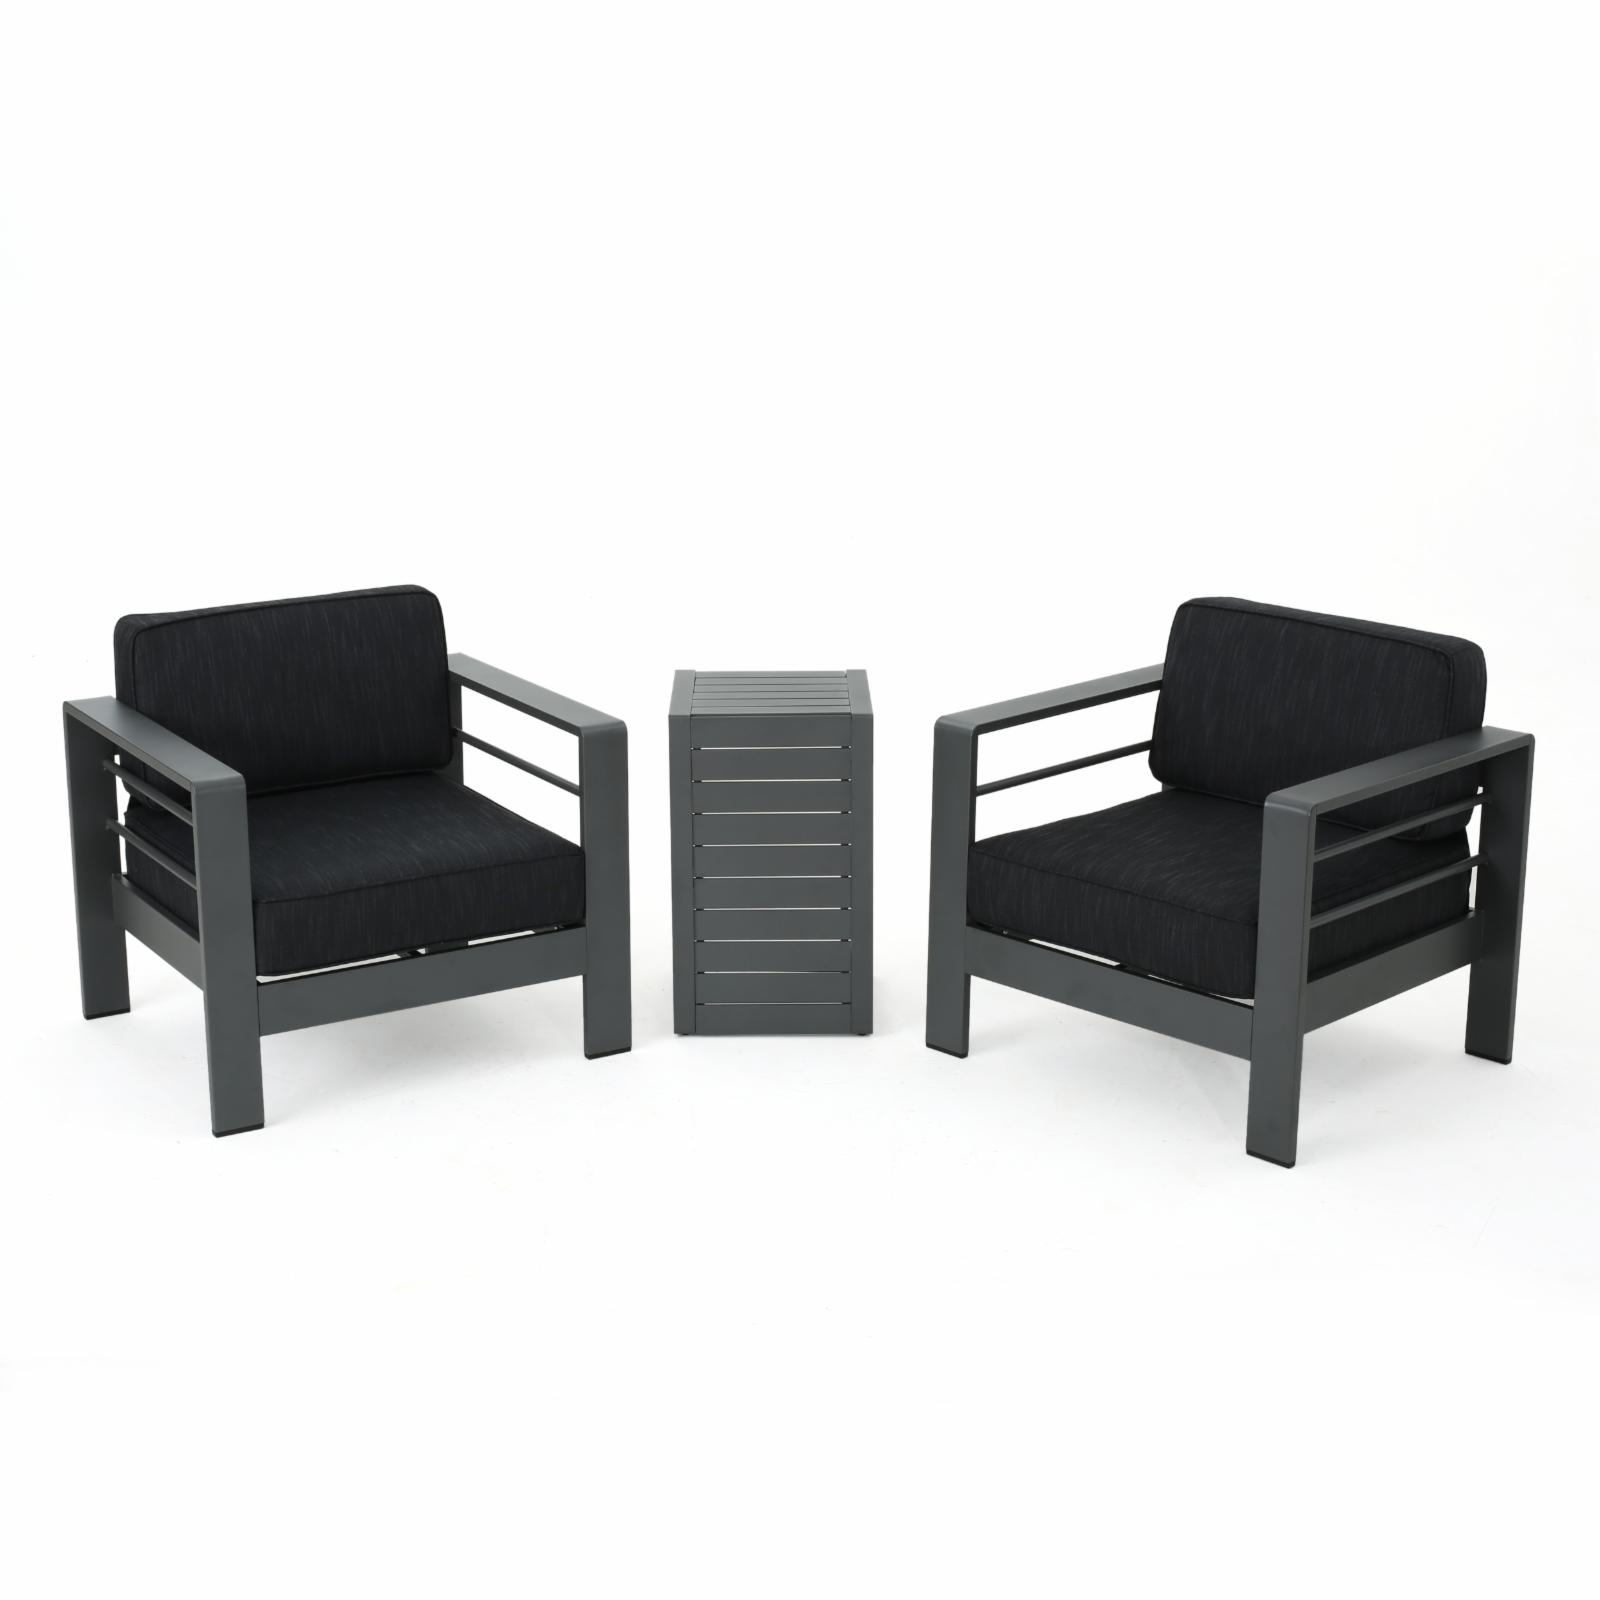 Xane Outdoor Club Chairs with Side Table - Aluminum and Khaki - image 3 of 10